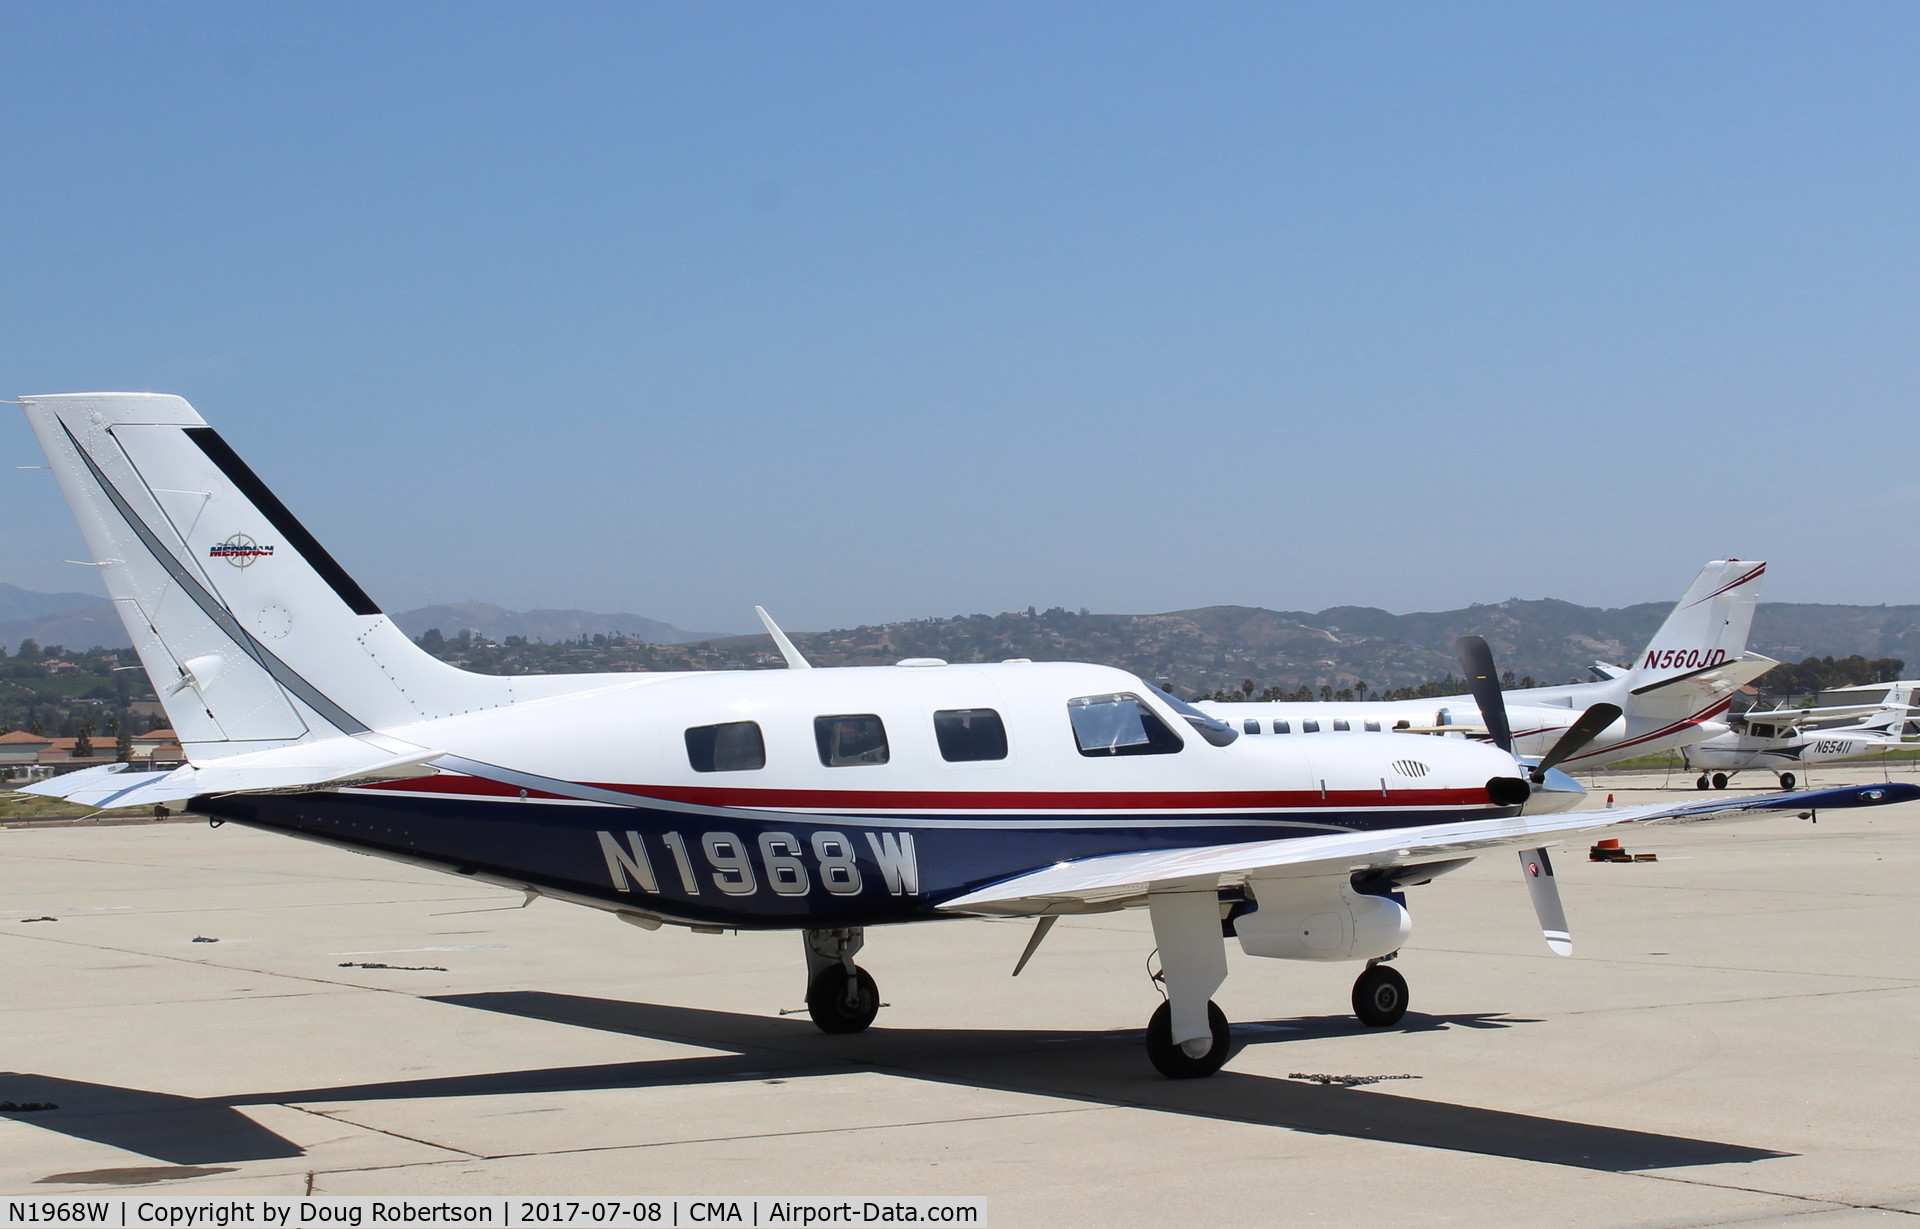 N1968W, 2001 Piper PA-46-500TP C/N 4697115, 2001 Piper PA-46-500TP MALIBU MERIDIAN, one P&W(C)PT6A-42A Turboprop derated to 500 sHp for takeoff, 6 seats